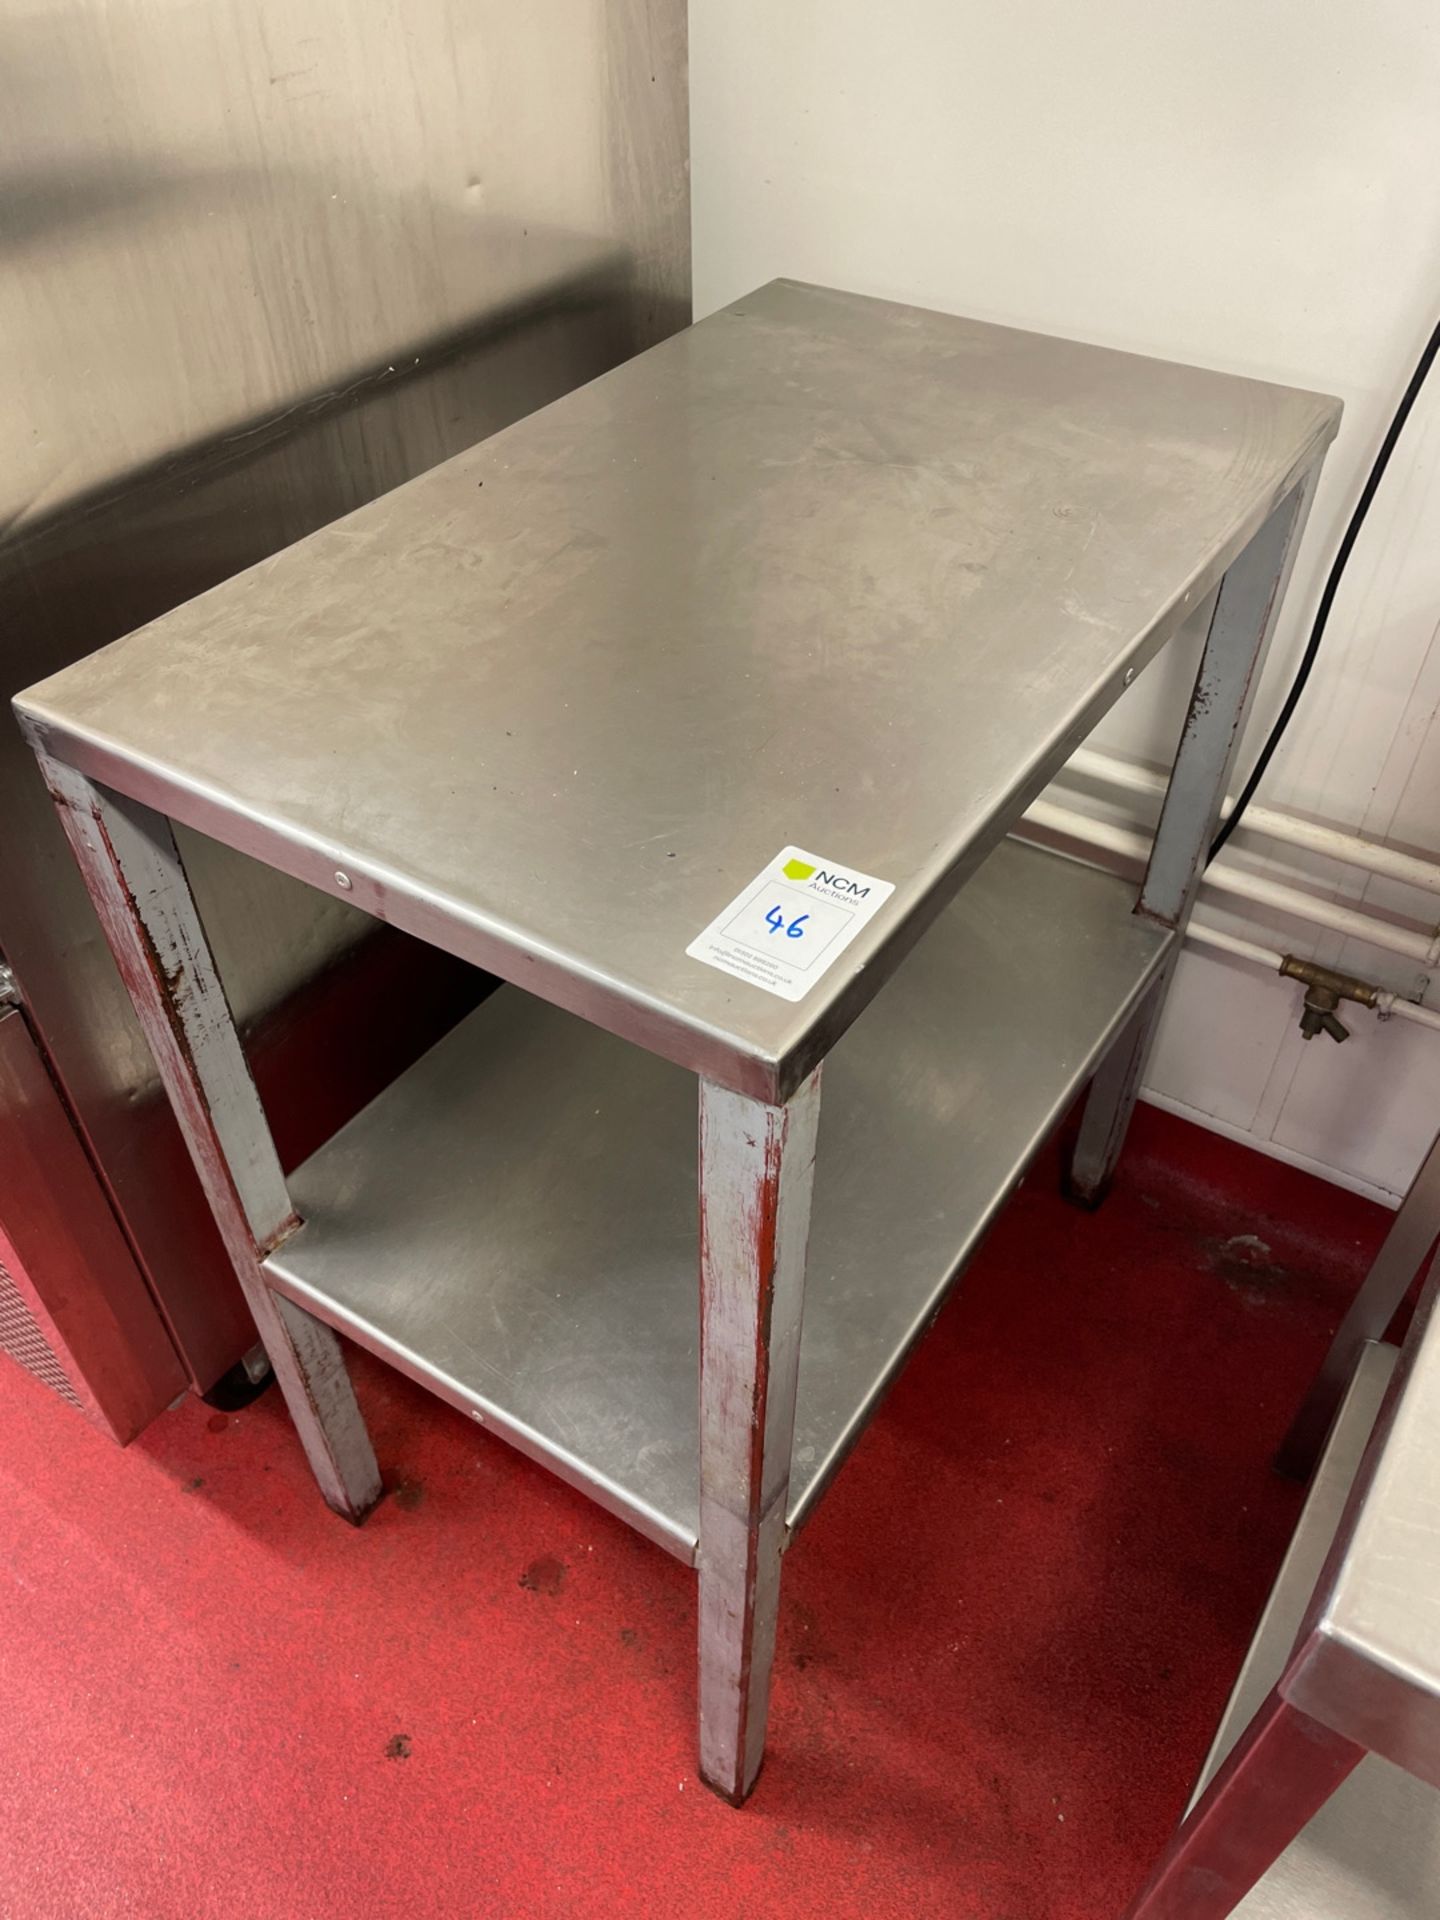 Stainless Steel Topped Prep Station